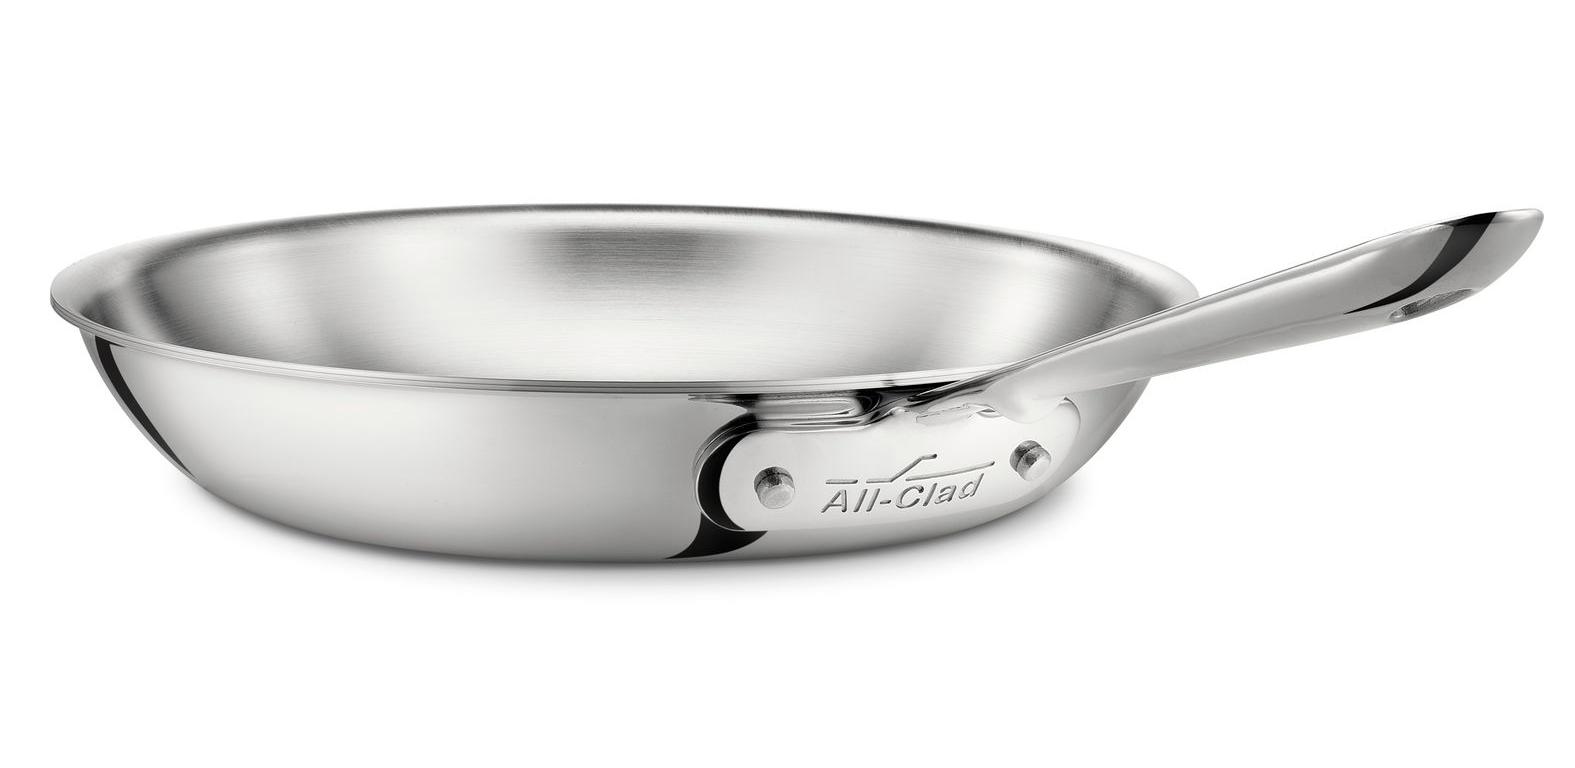 All-Clad SD5 8-Inch Fry Pan for $69.95